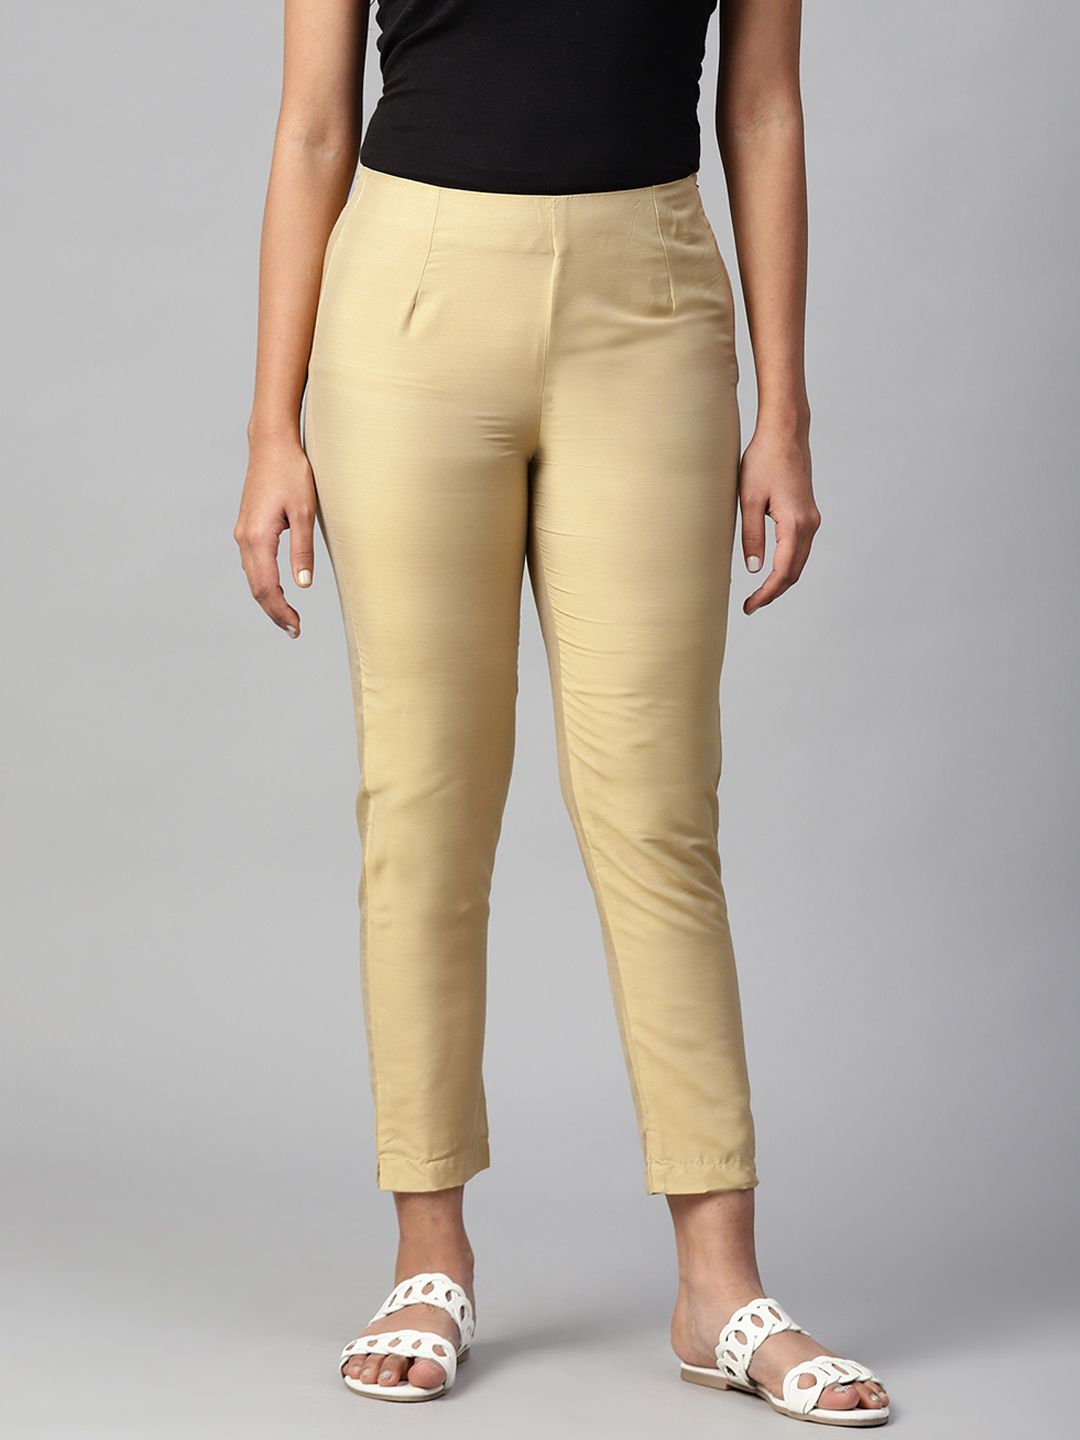 W Women Beige Slim Fit Solid Regular Cropped Trousers Price in India